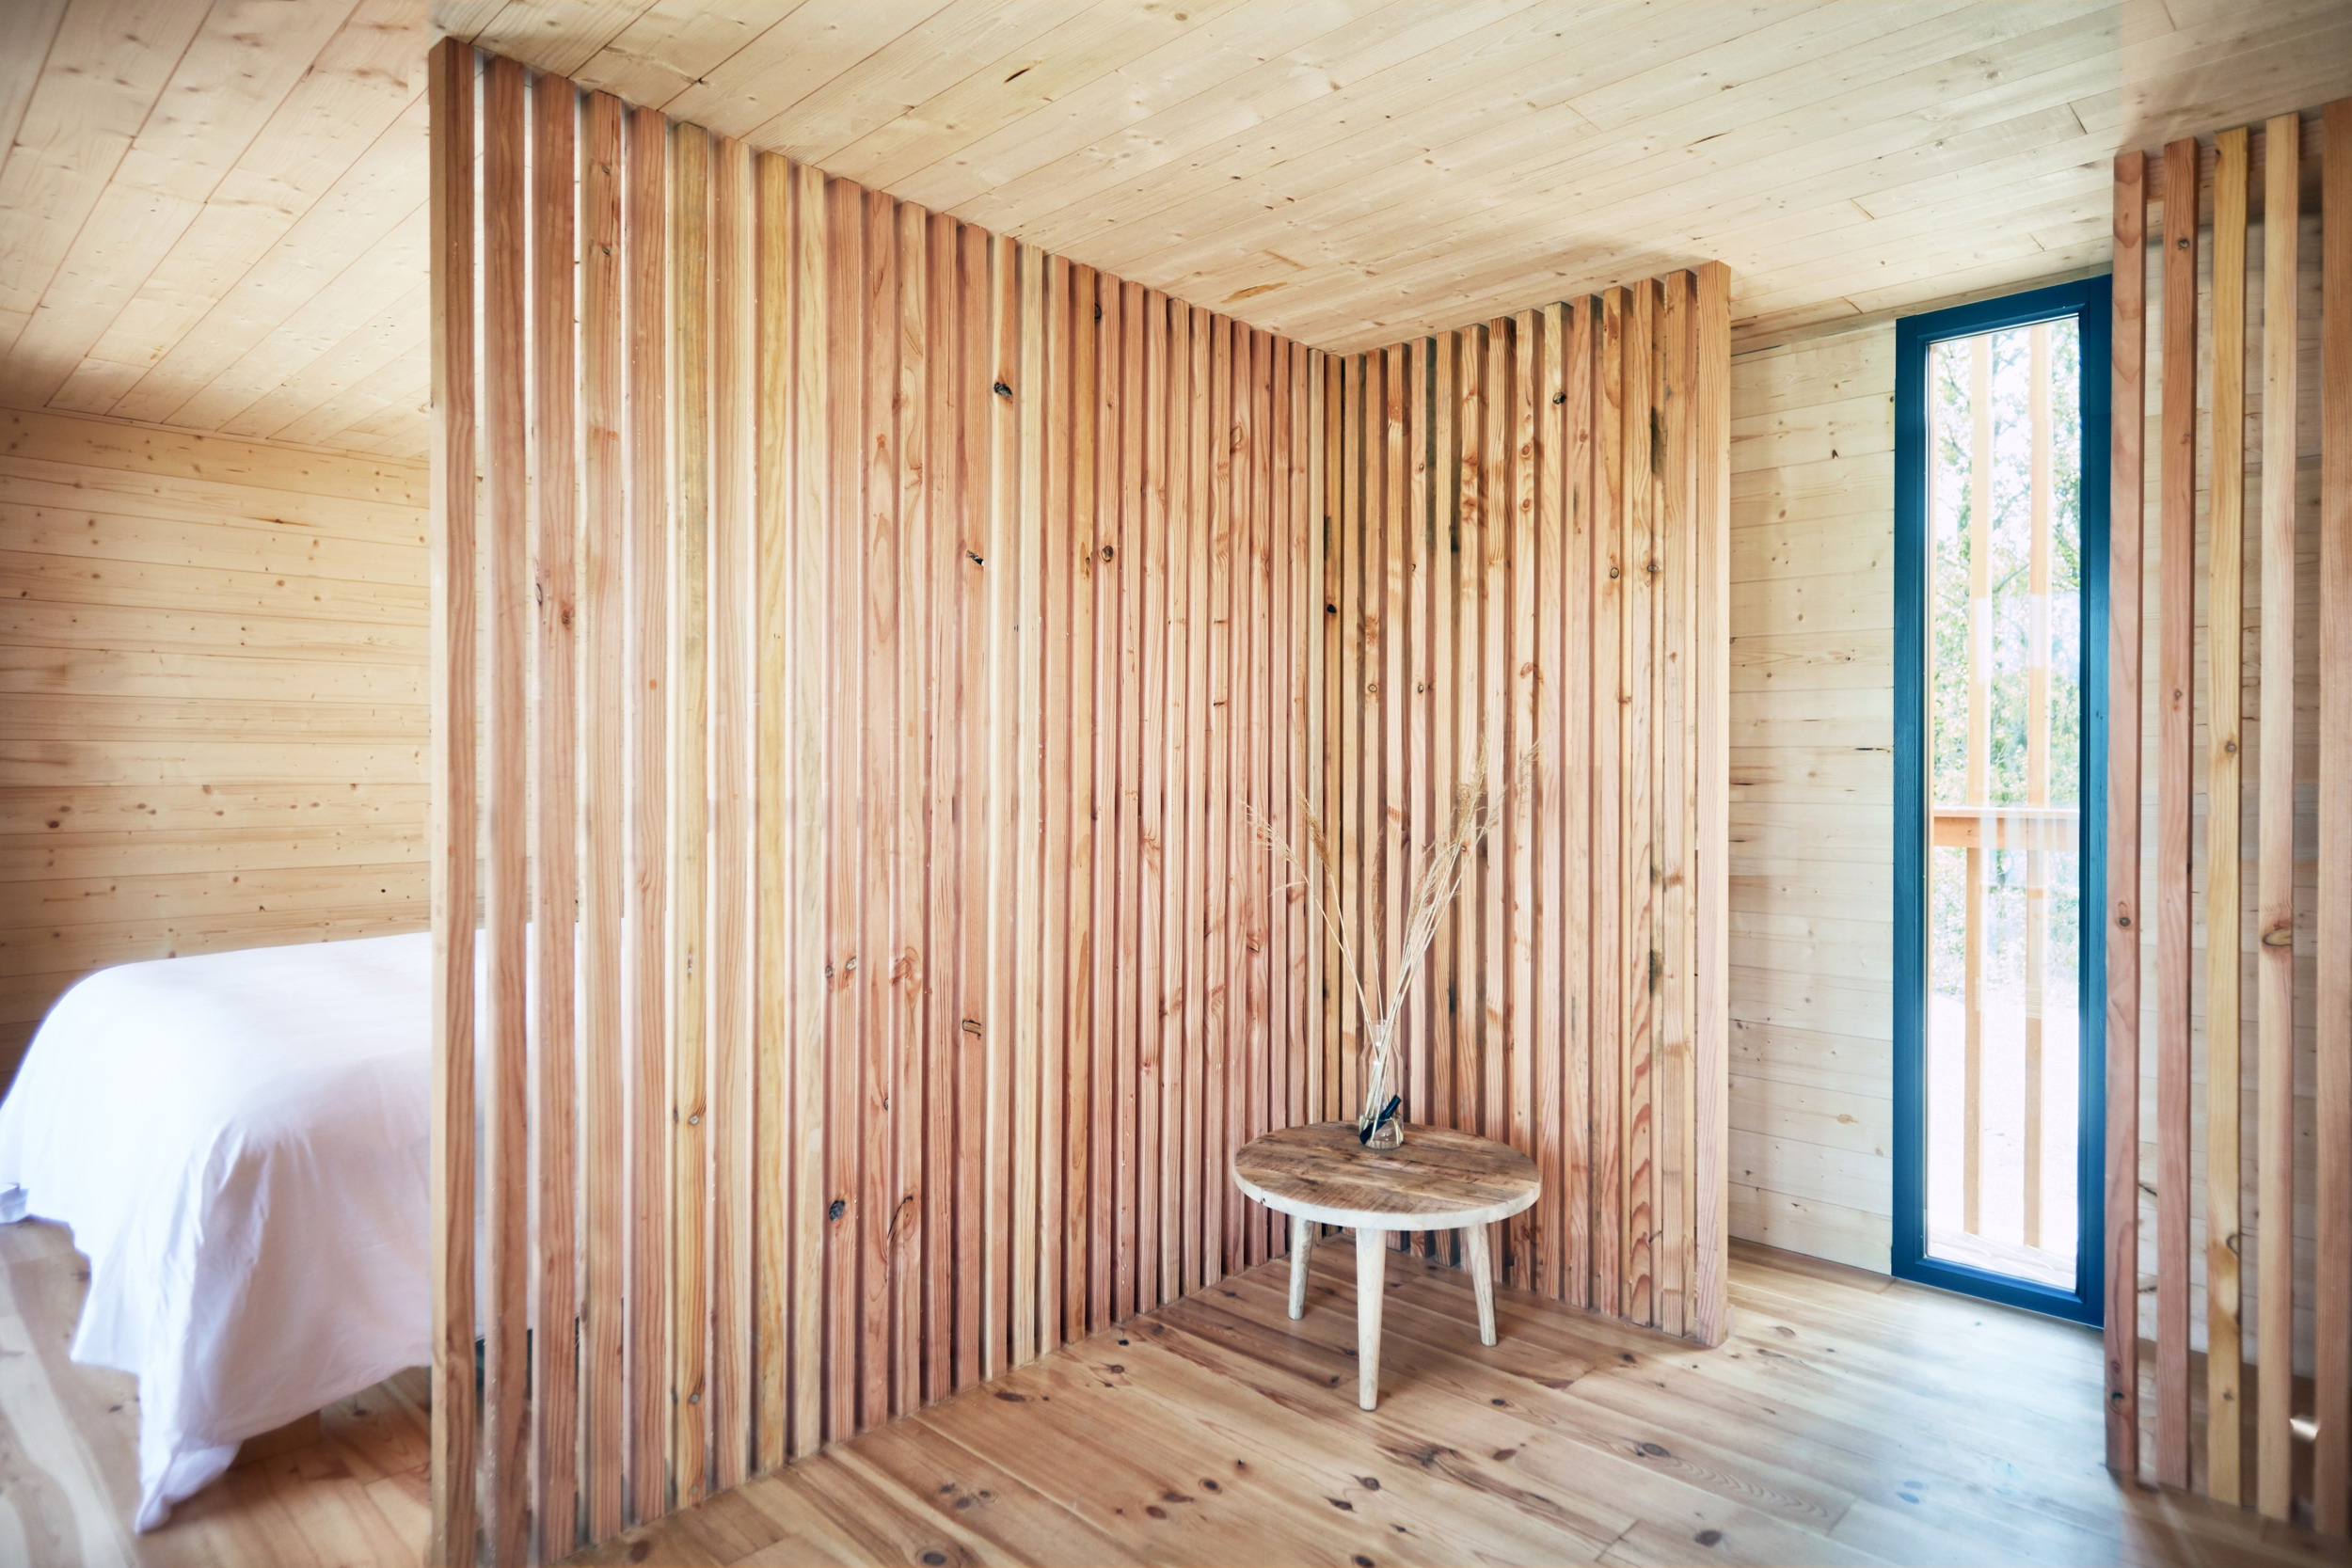 GCP Wood Cabins Hotel by Atelier LAVIT